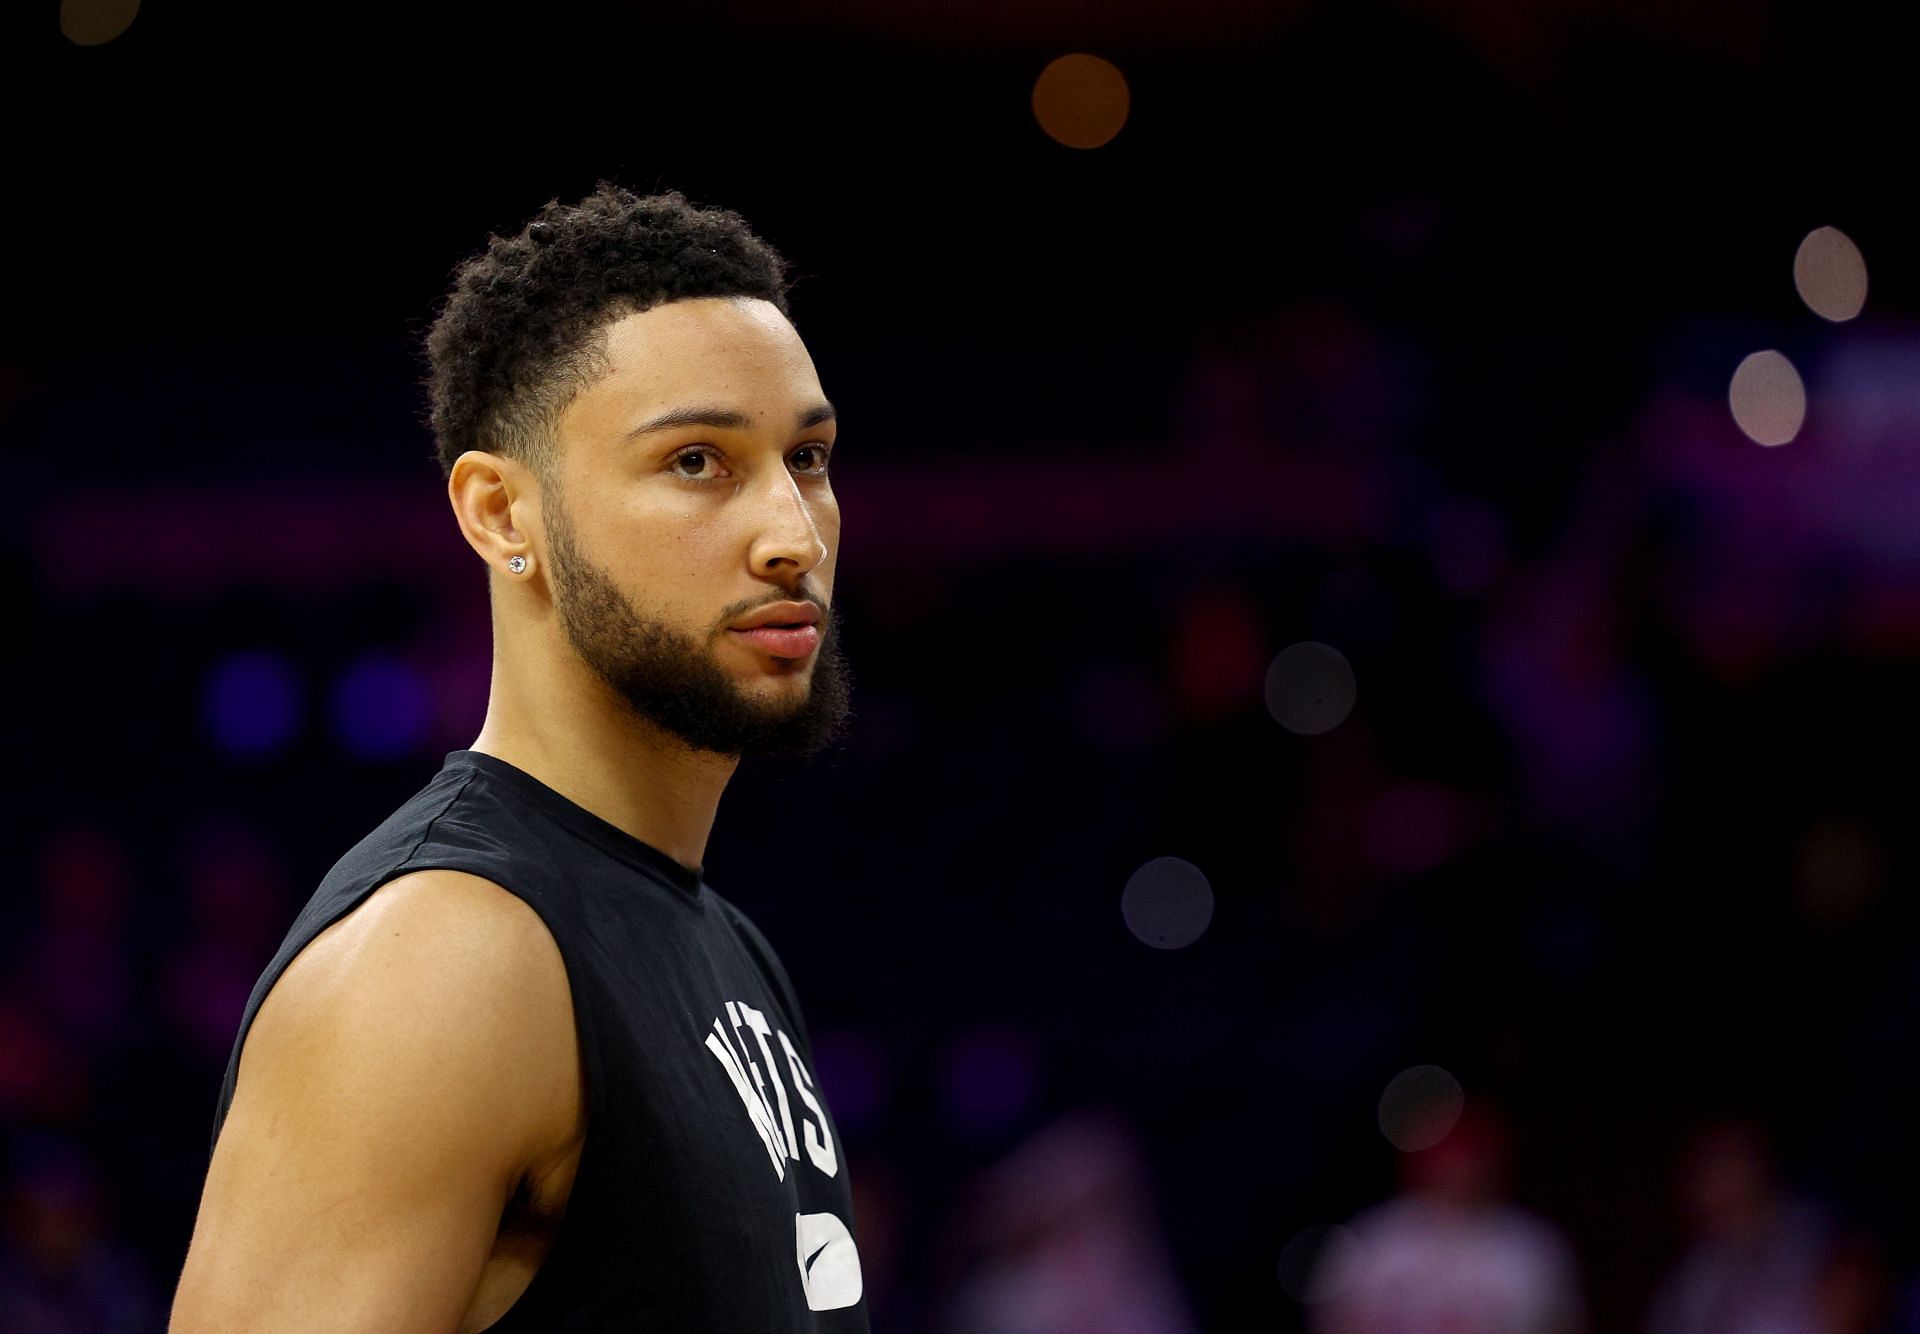 Charles Barkley hammers disgruntled Sixers star Ben Simmons